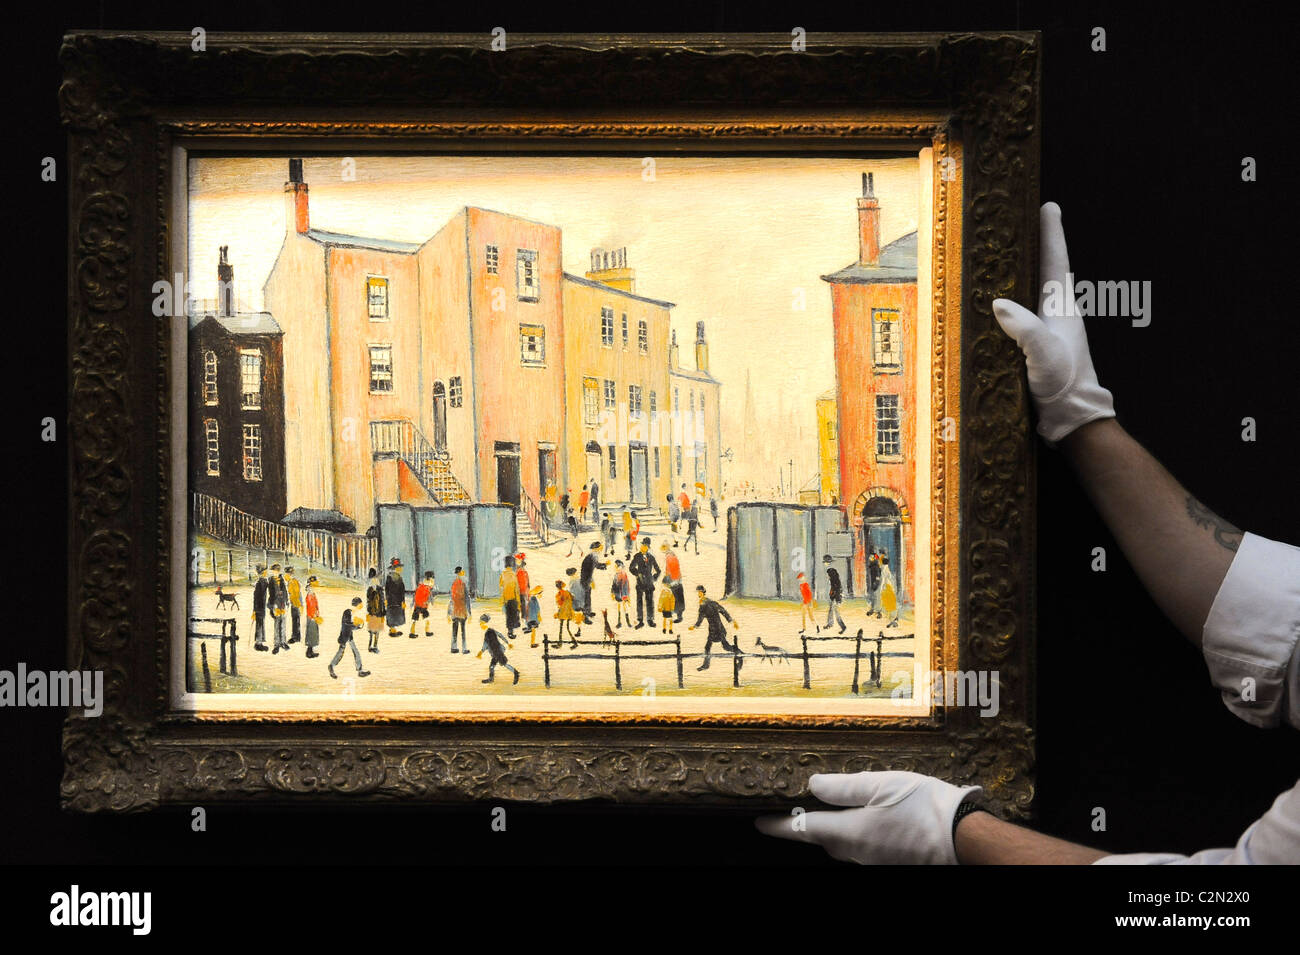 L.S Lowry's 'Old Houses', Sotheby's London presents 'A Life in Pictures: The Collection of Lord and Lady Attenborough', London, Stock Photo